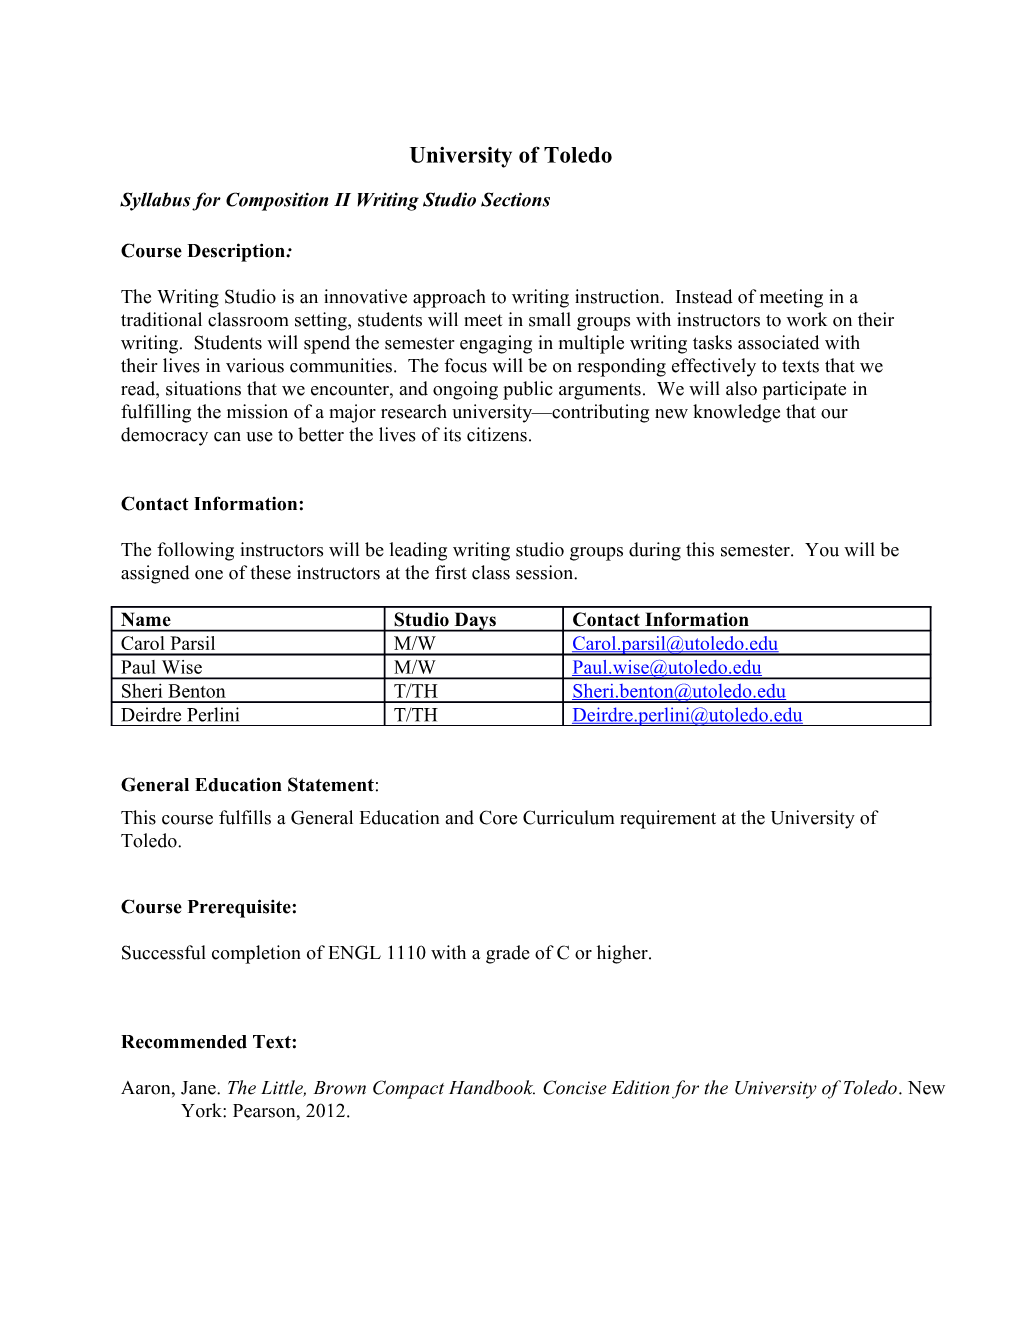 Syllabus for Composition II Writing Studio Sections